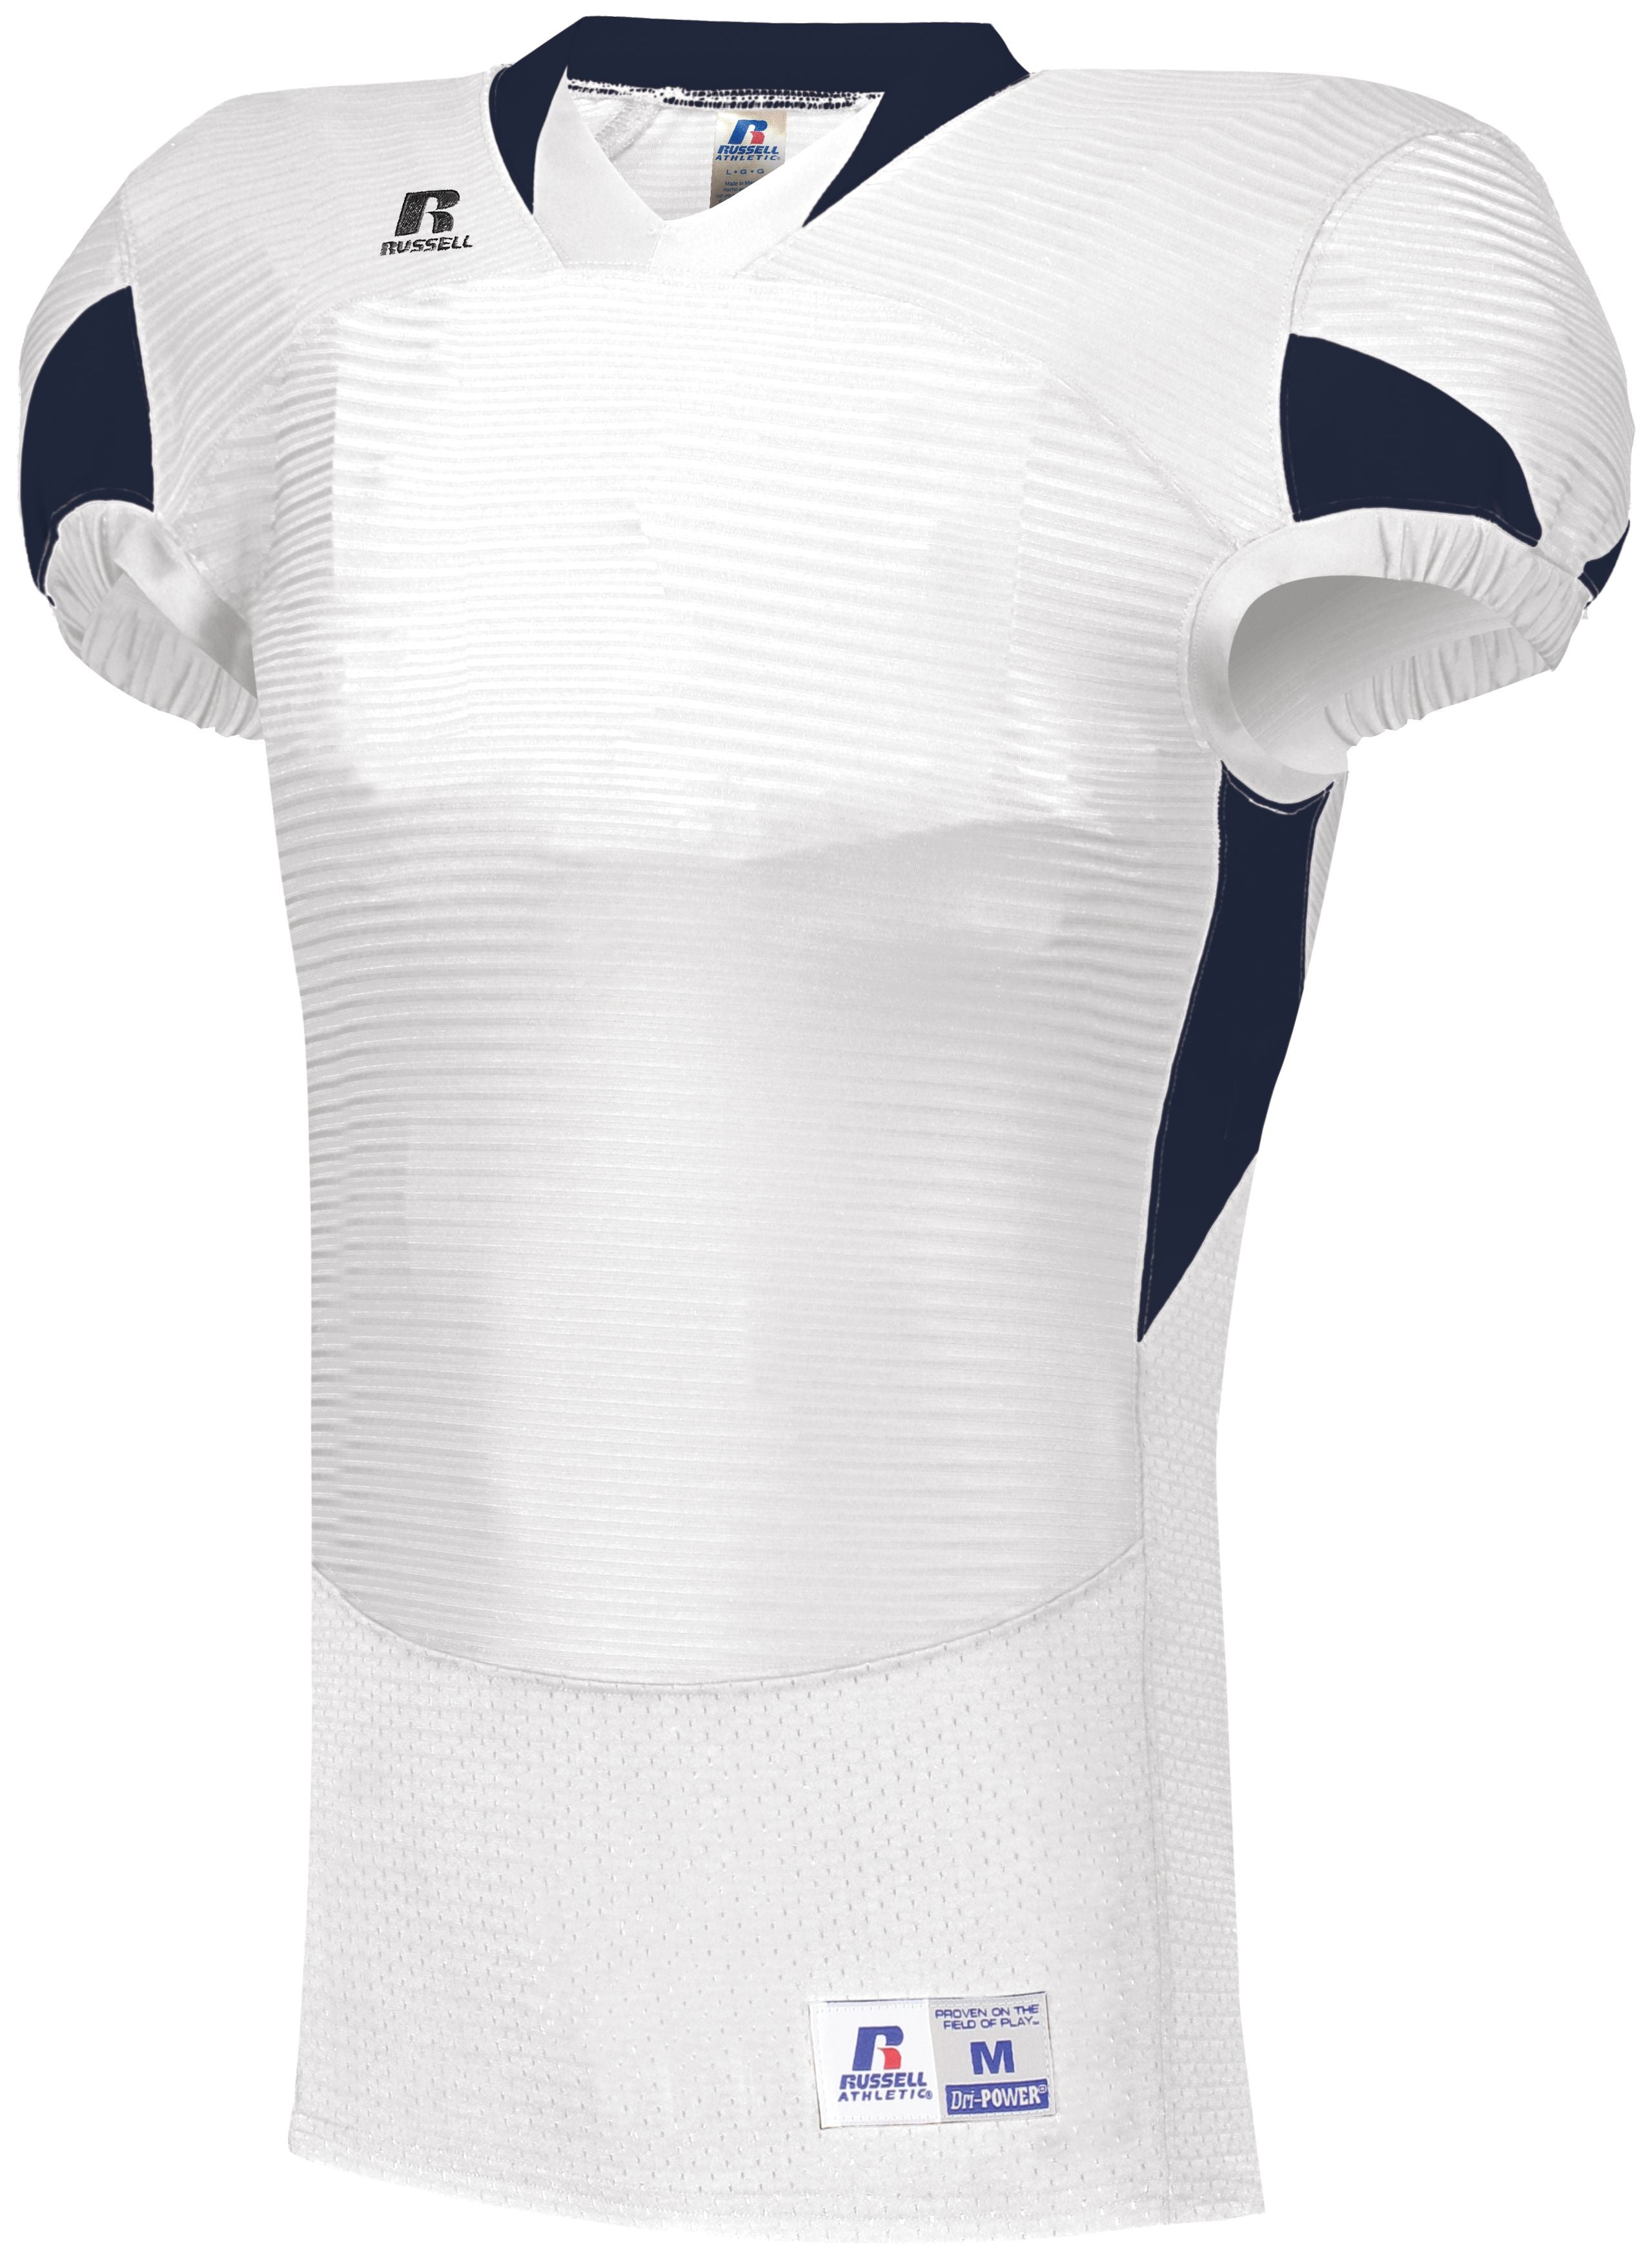 Russell Athletic Waist Length Football Jersey in White/Navy  -Part of the Adult, Adult-Jersey, Football, Russell-Athletic-Products, Shirts, All-Sports, All-Sports-1 product lines at KanaleyCreations.com